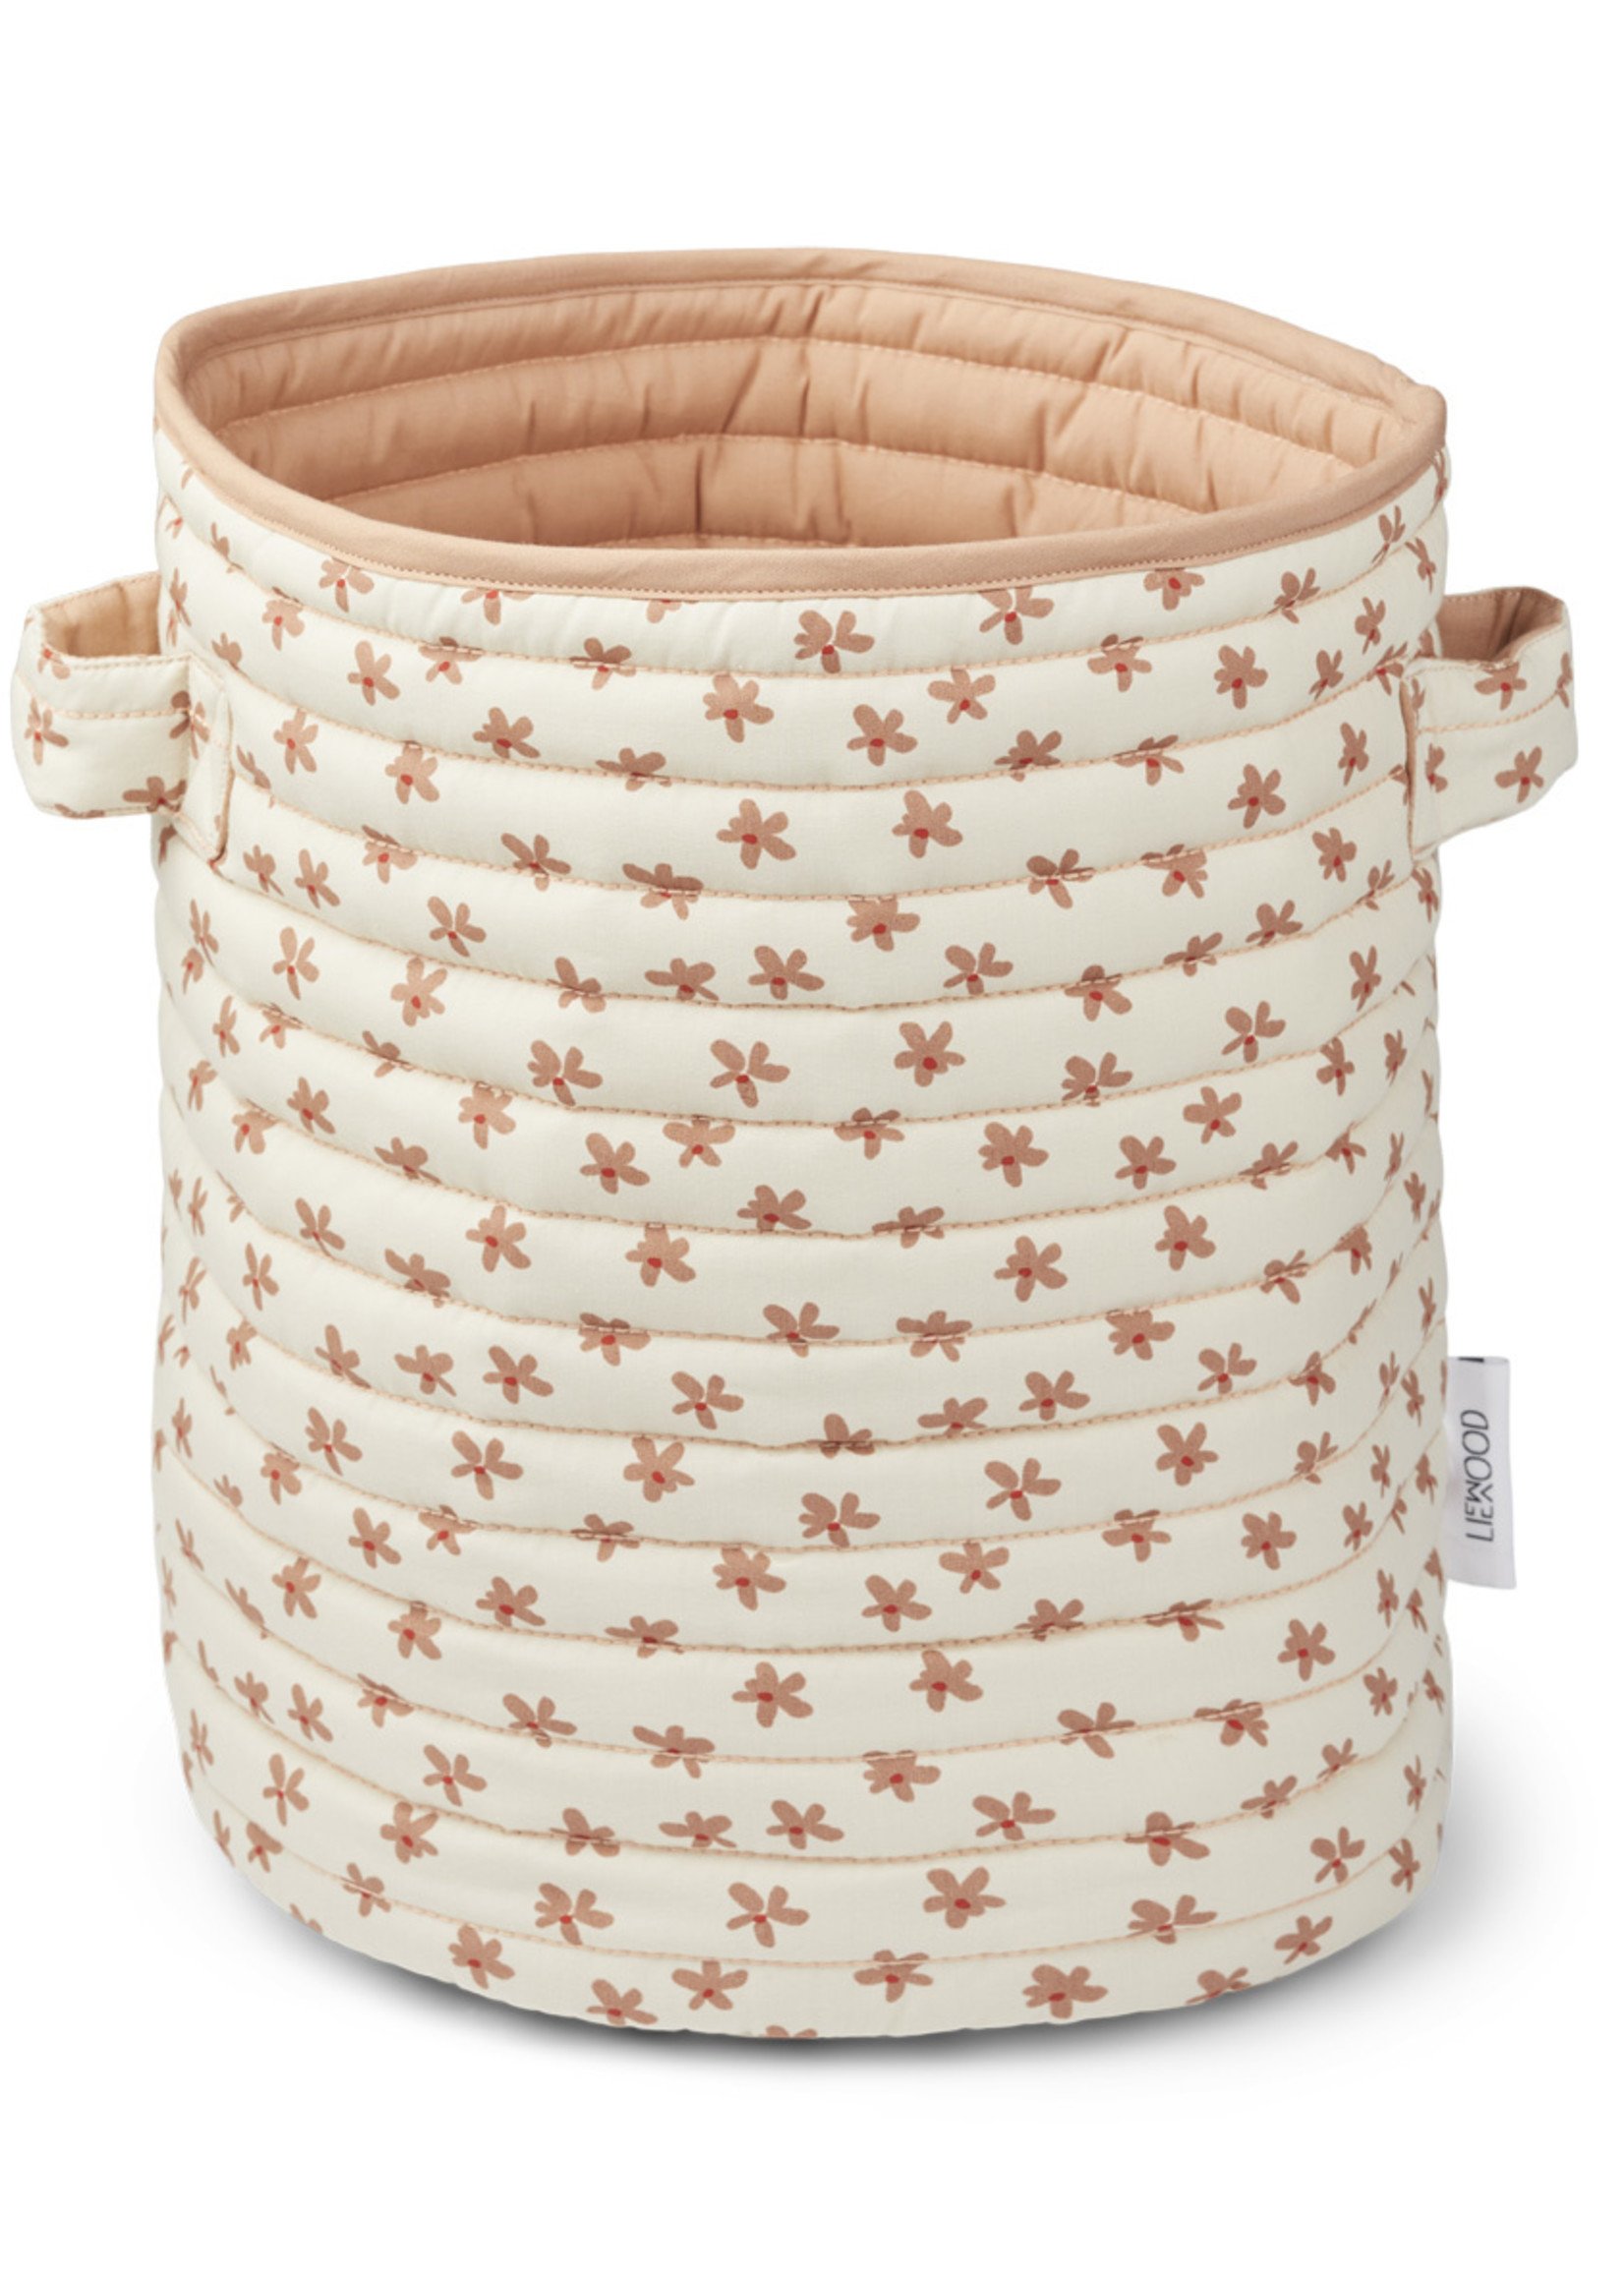 Liewood Ally quilted basket, 0294 Floral/Sea shell